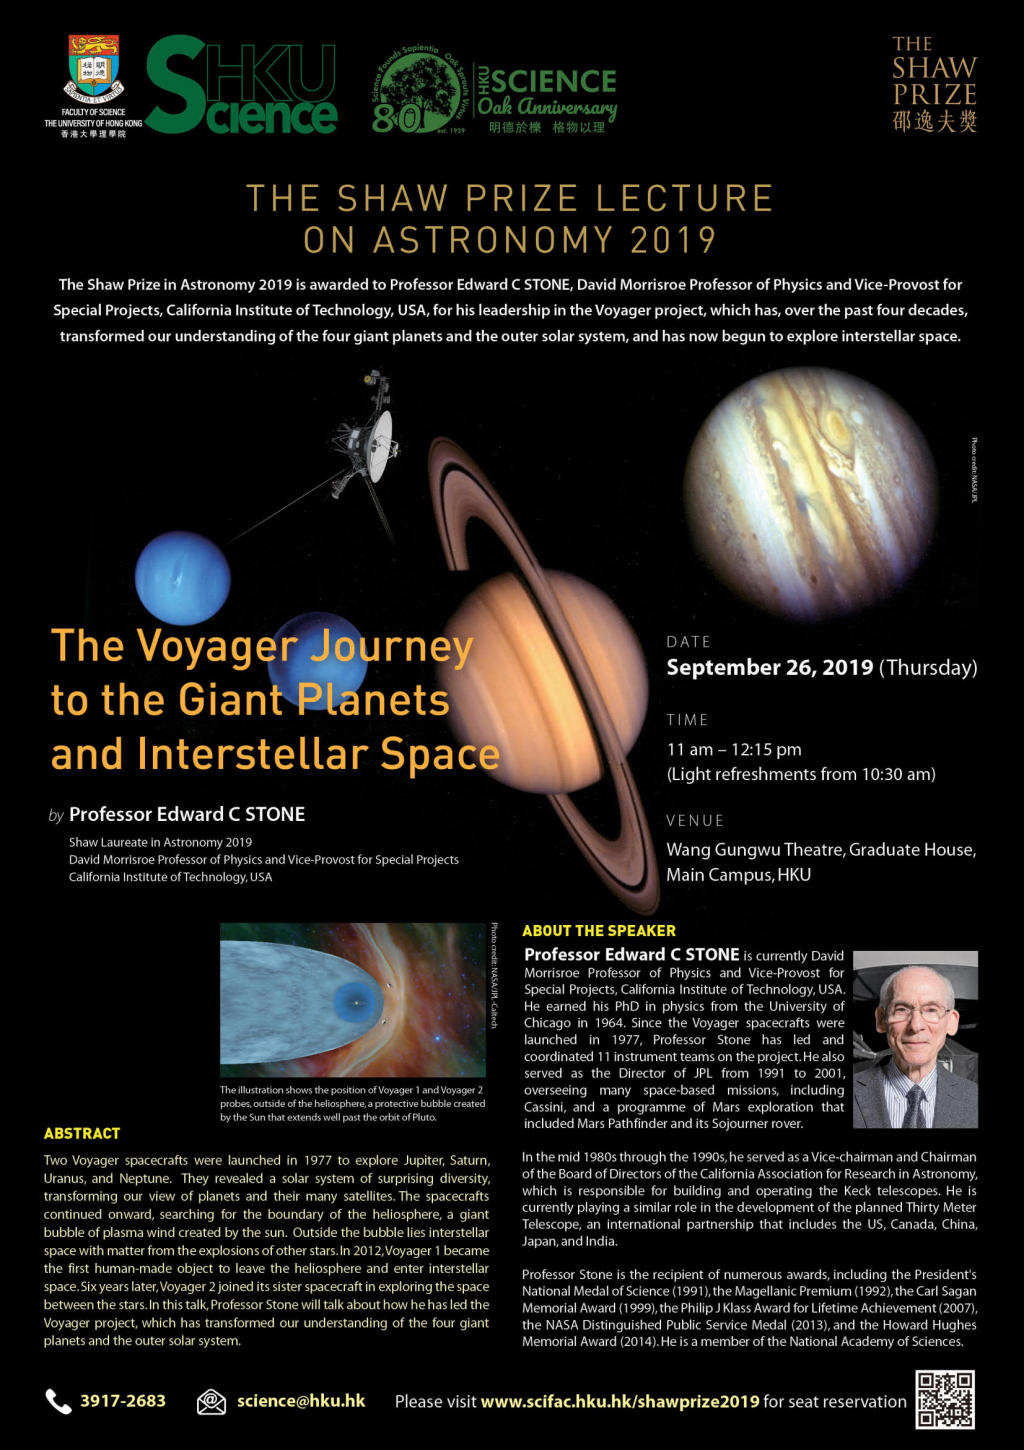 The Shaw Prize Lecture on Astronomy 2019 